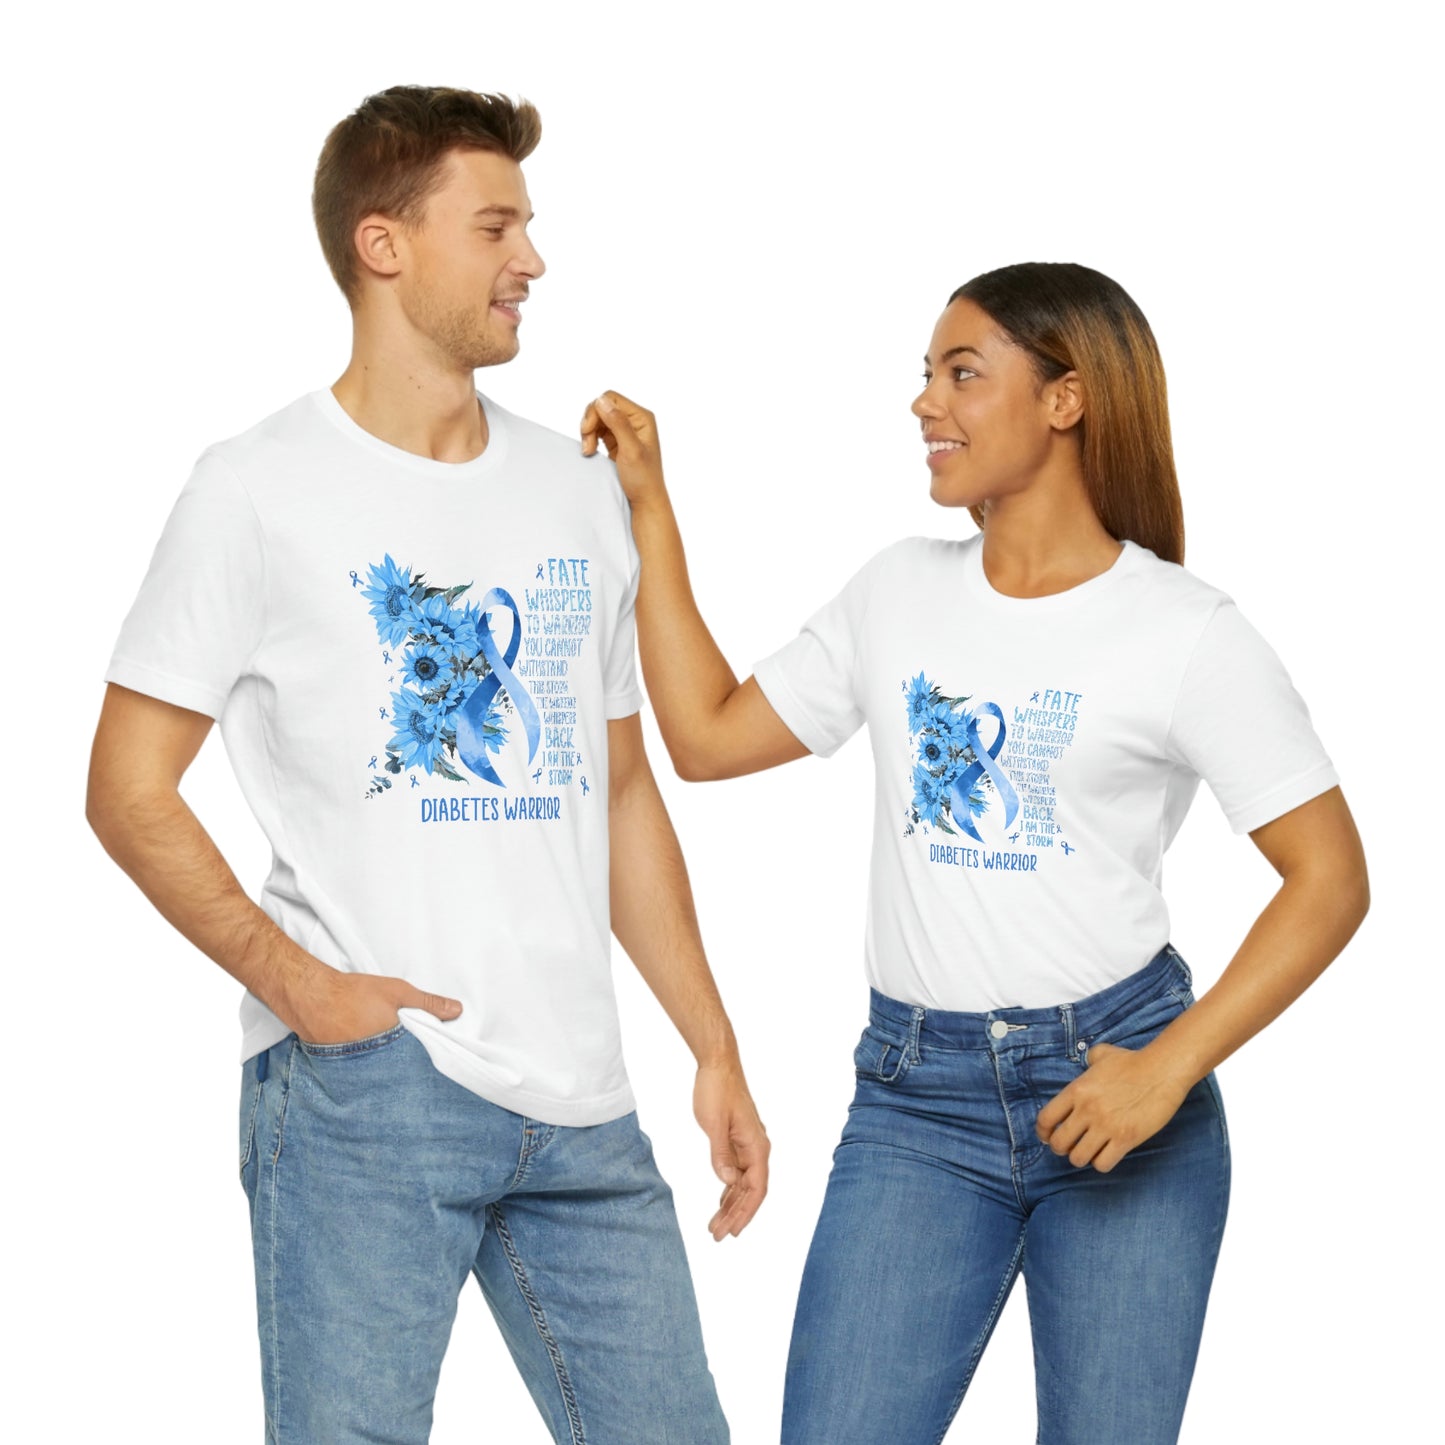 Fate Whispers to the Warrior Diabetes Awareness Print Unisex Jersey Short Sleeve Tee